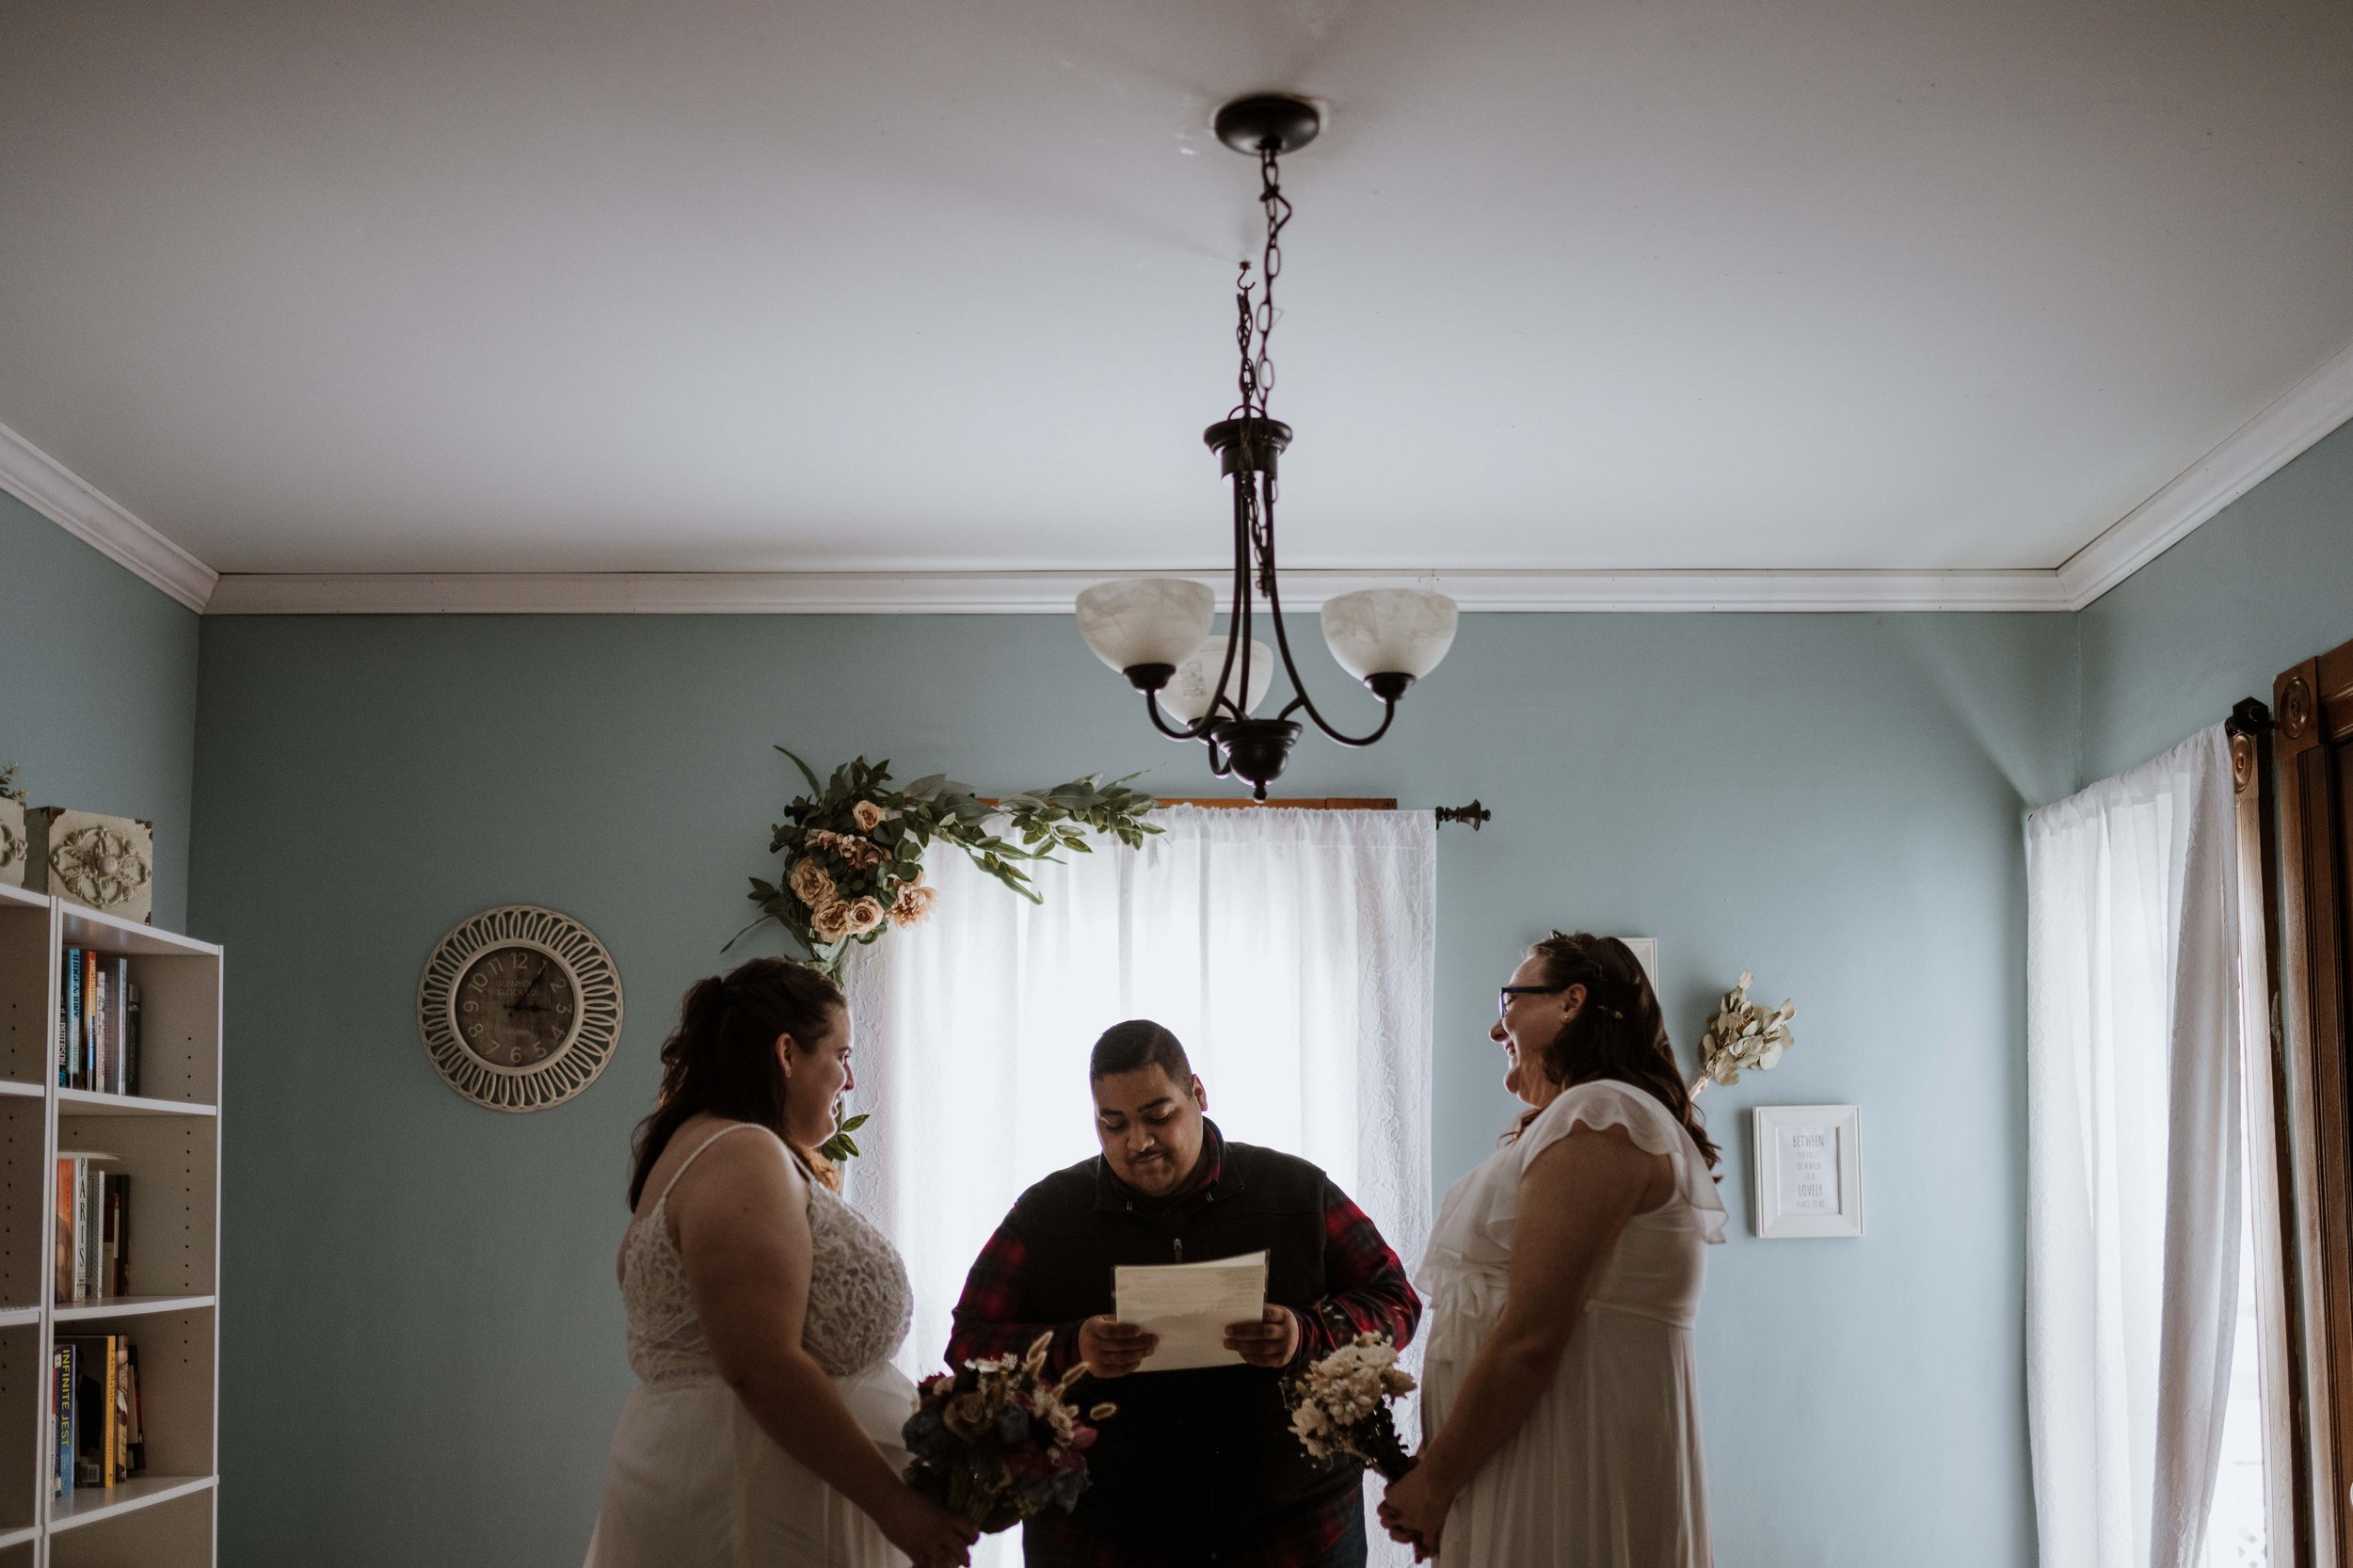 An eloping couple exchanging vows in their new home.